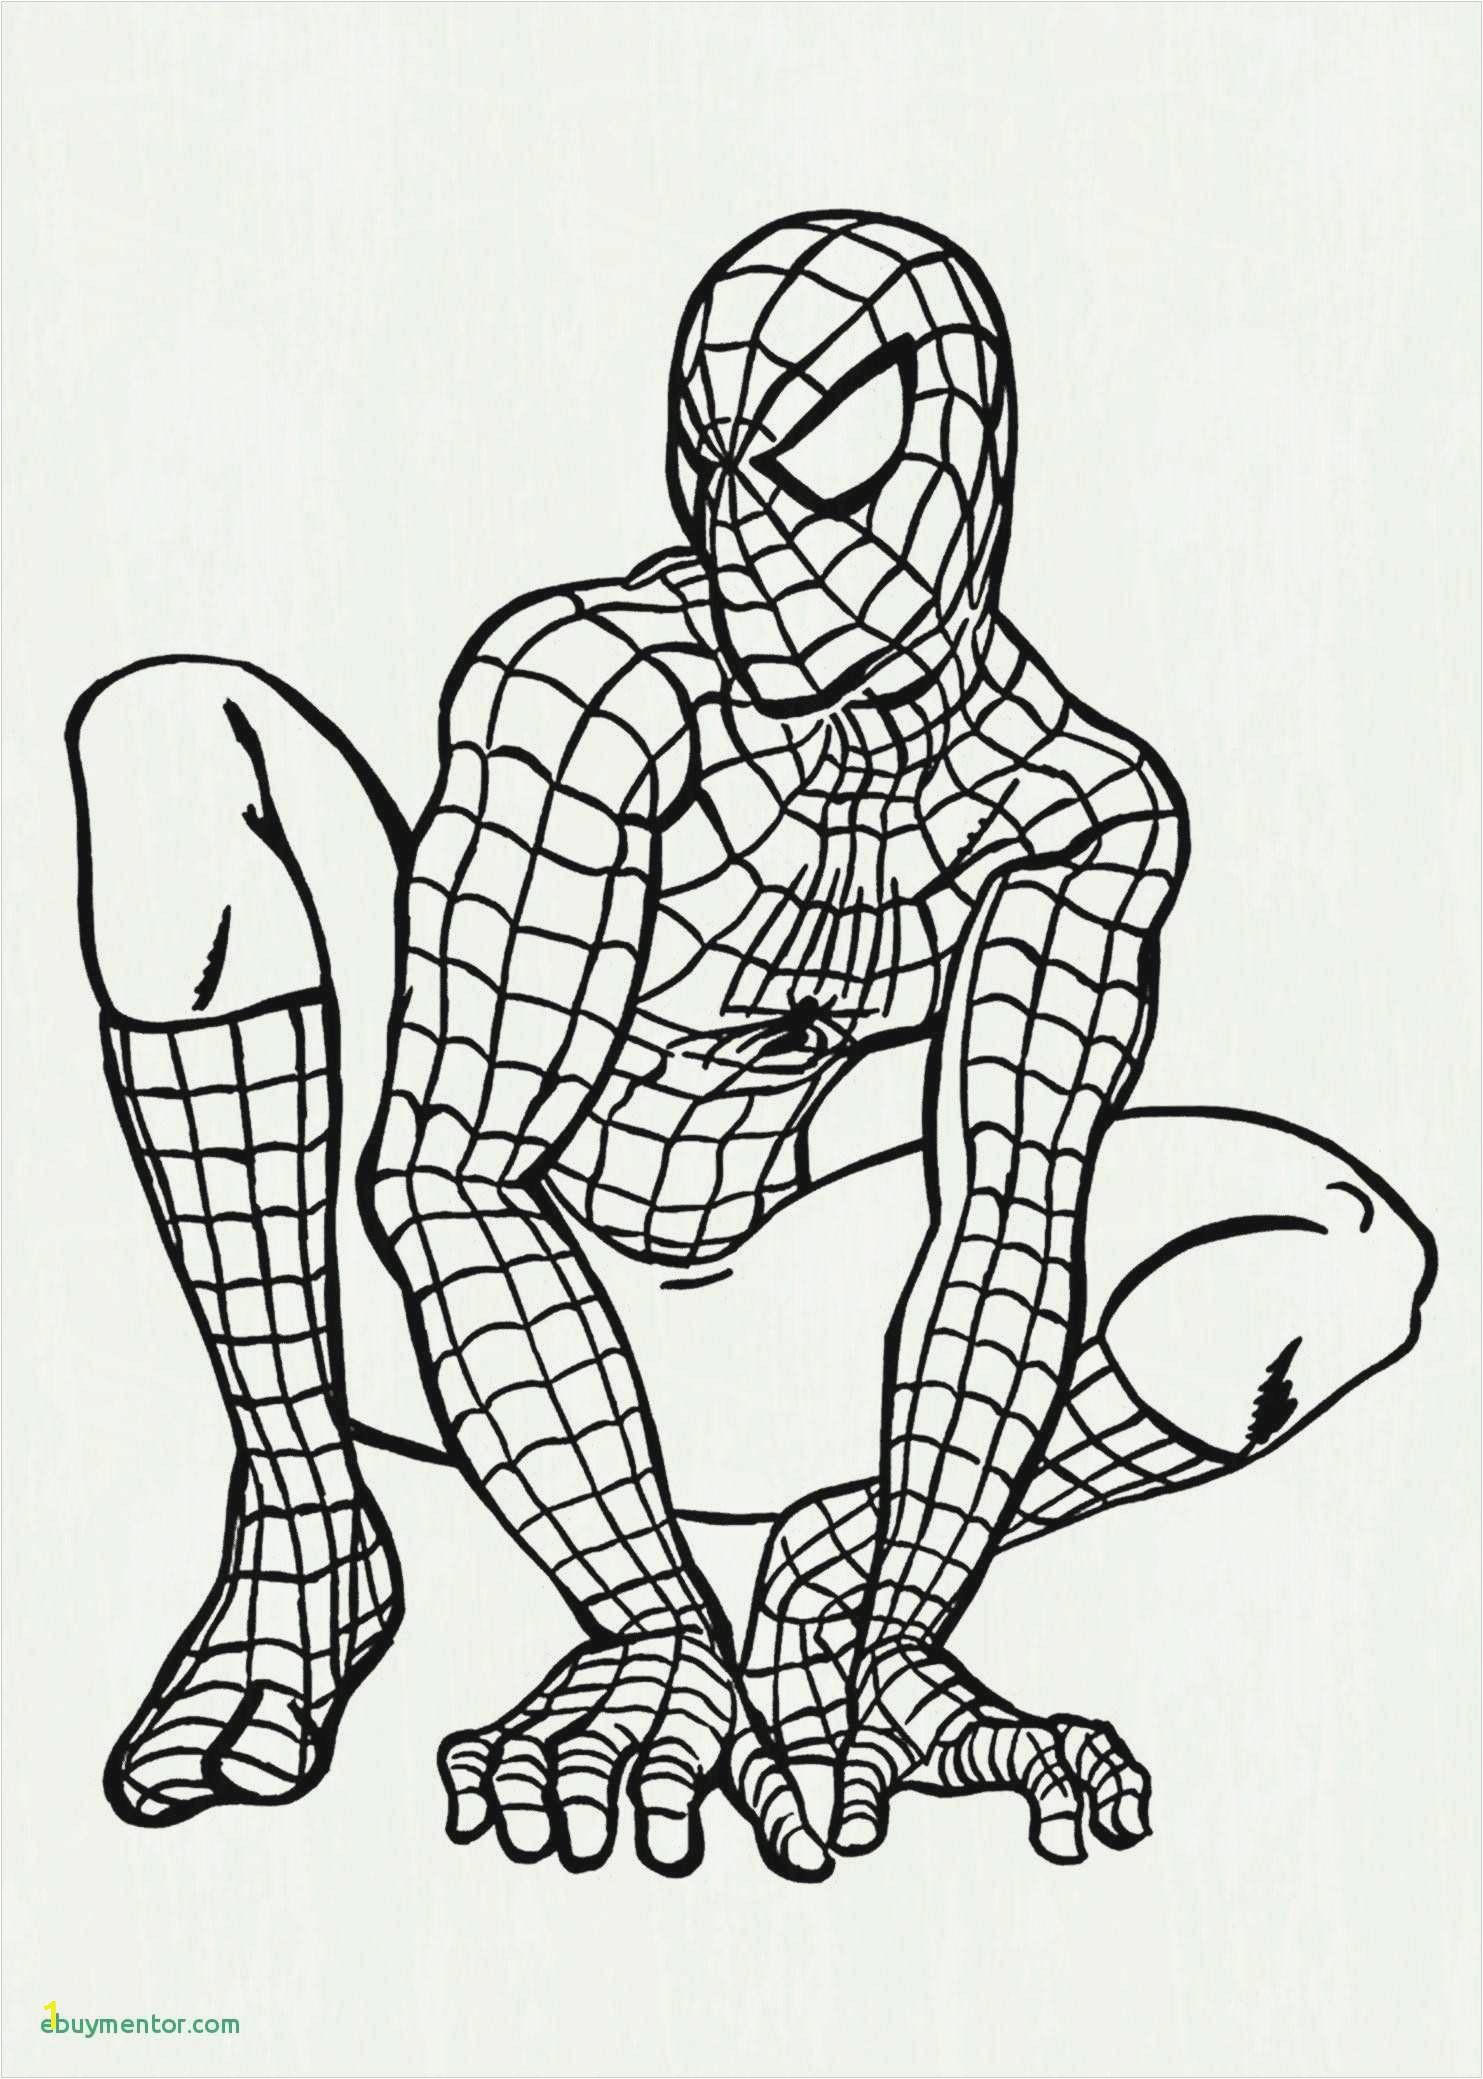 Spider Man and Iron Man Coloring Pages New Coloring Pages Superhero Printable Fresh 0 0d